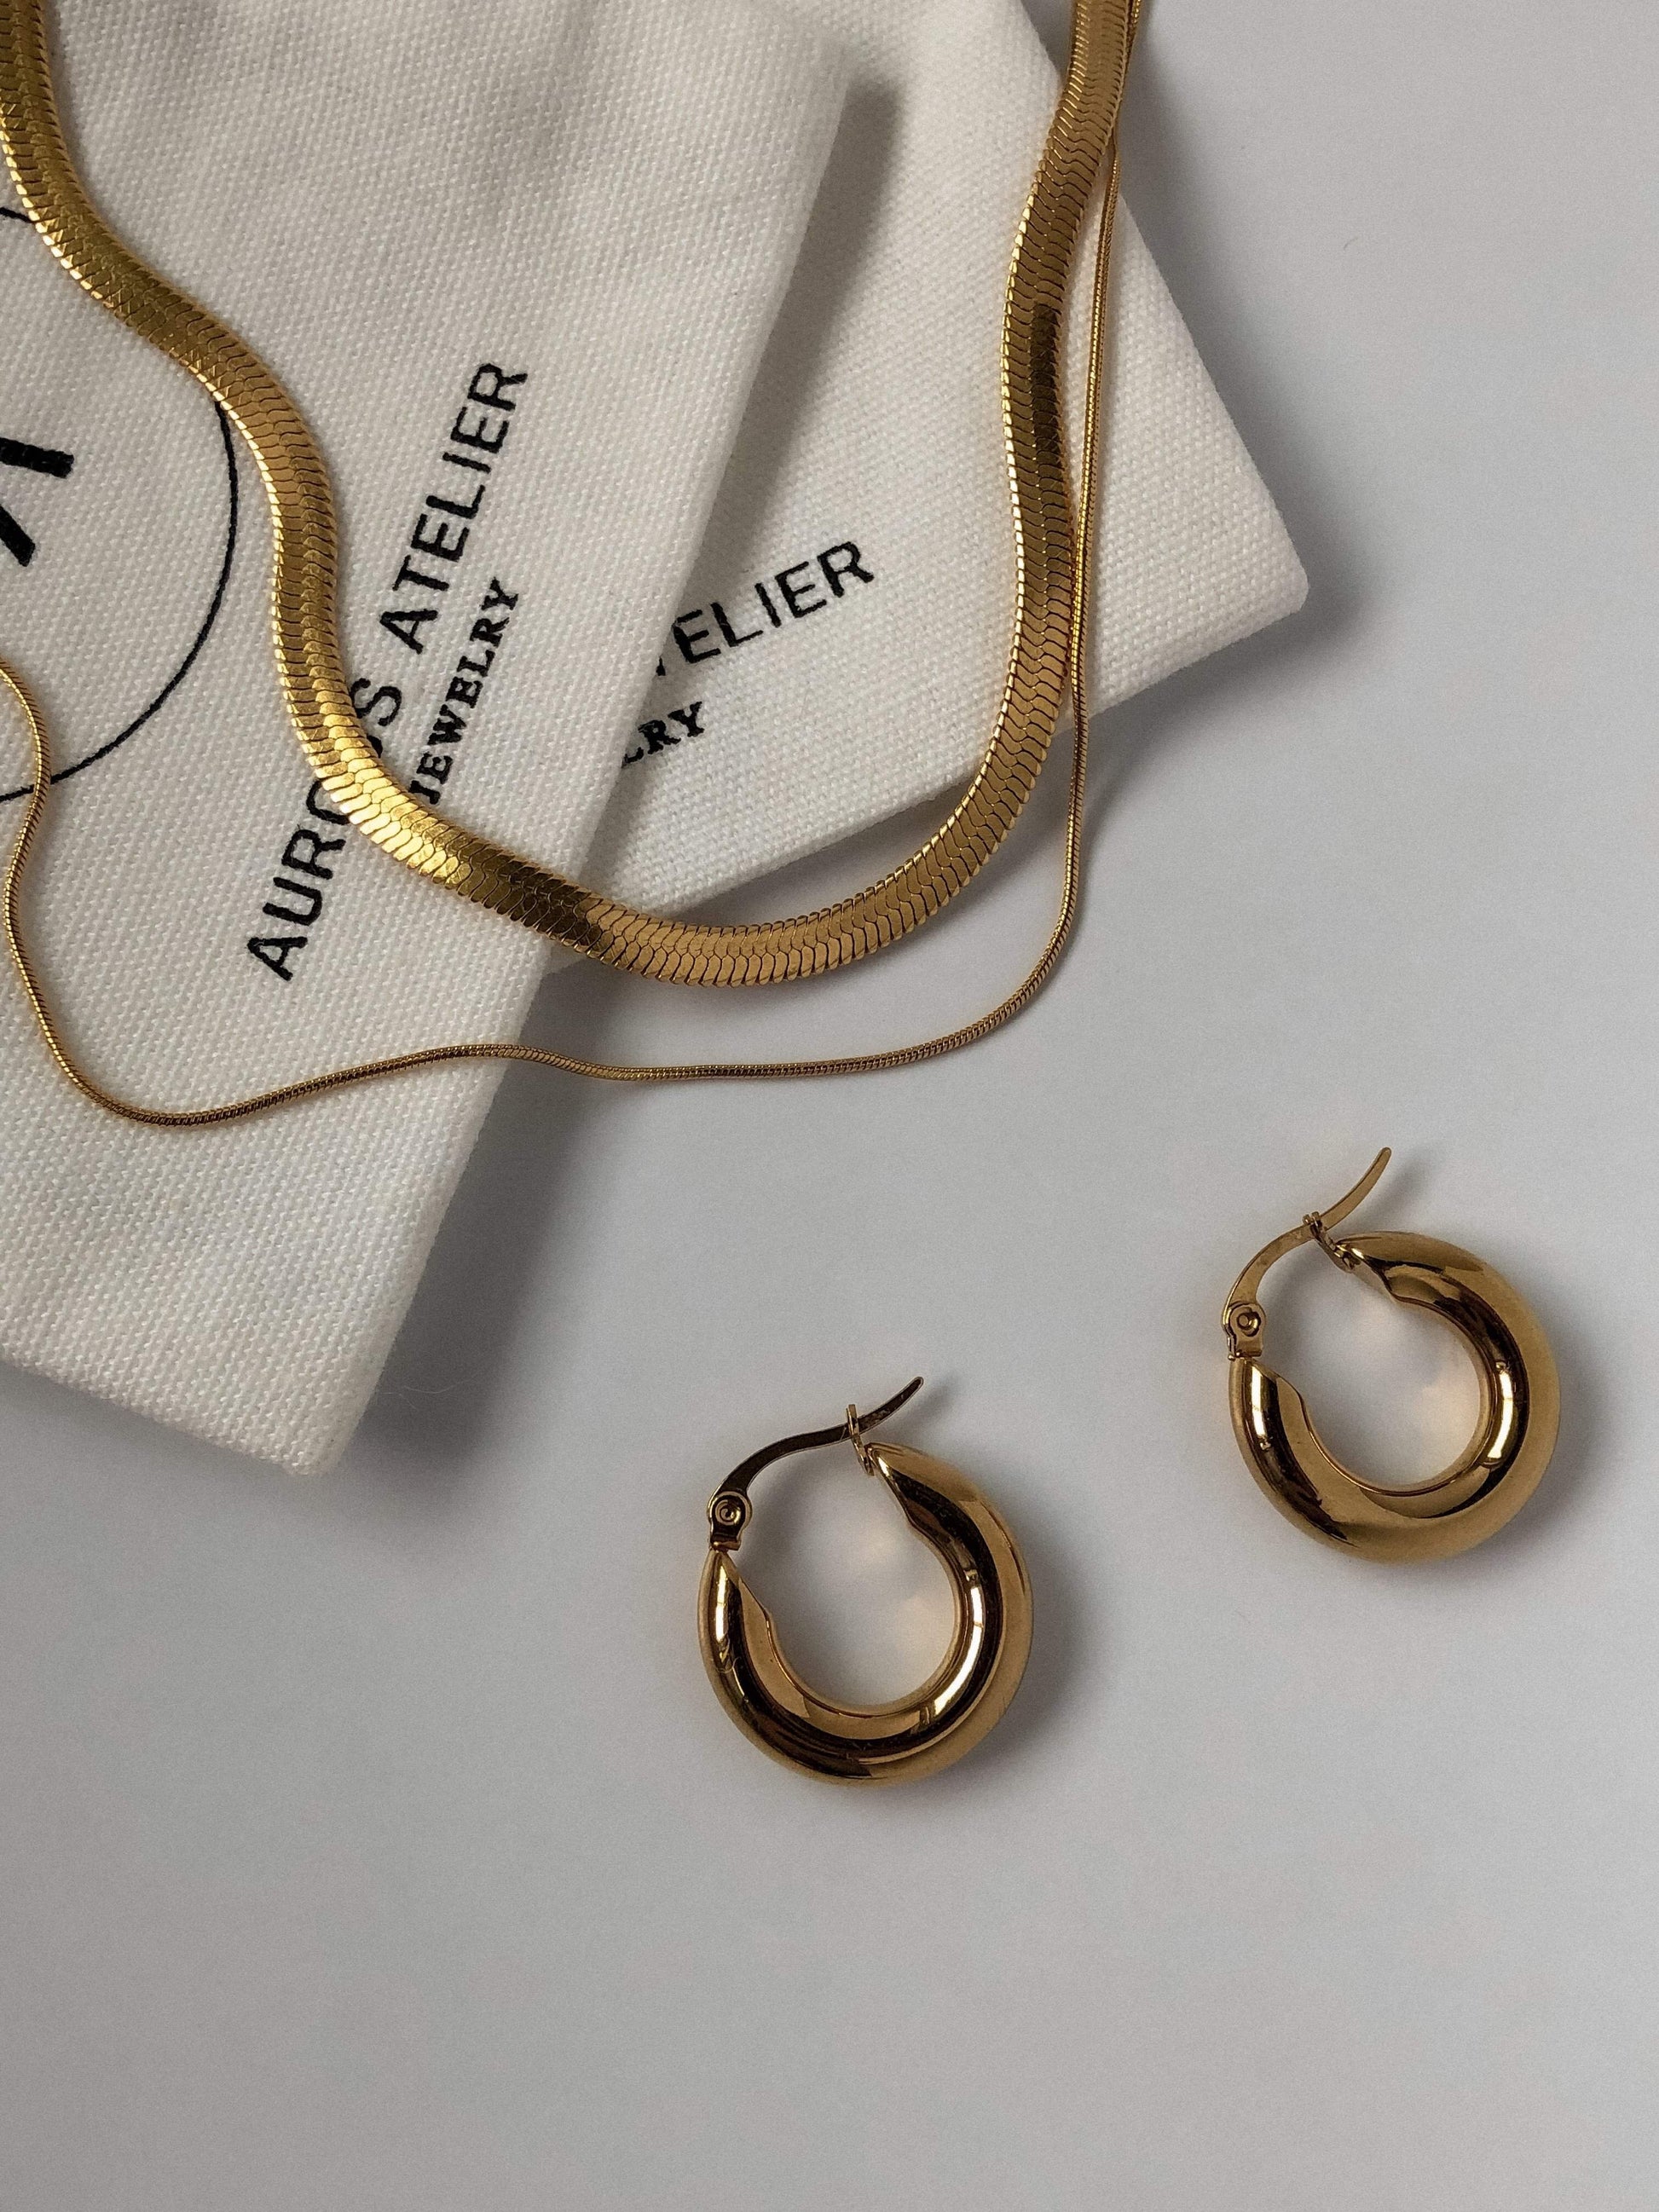 a flatlay image of a double layered gold herringbone and a pair of classic hoops on a white surface.